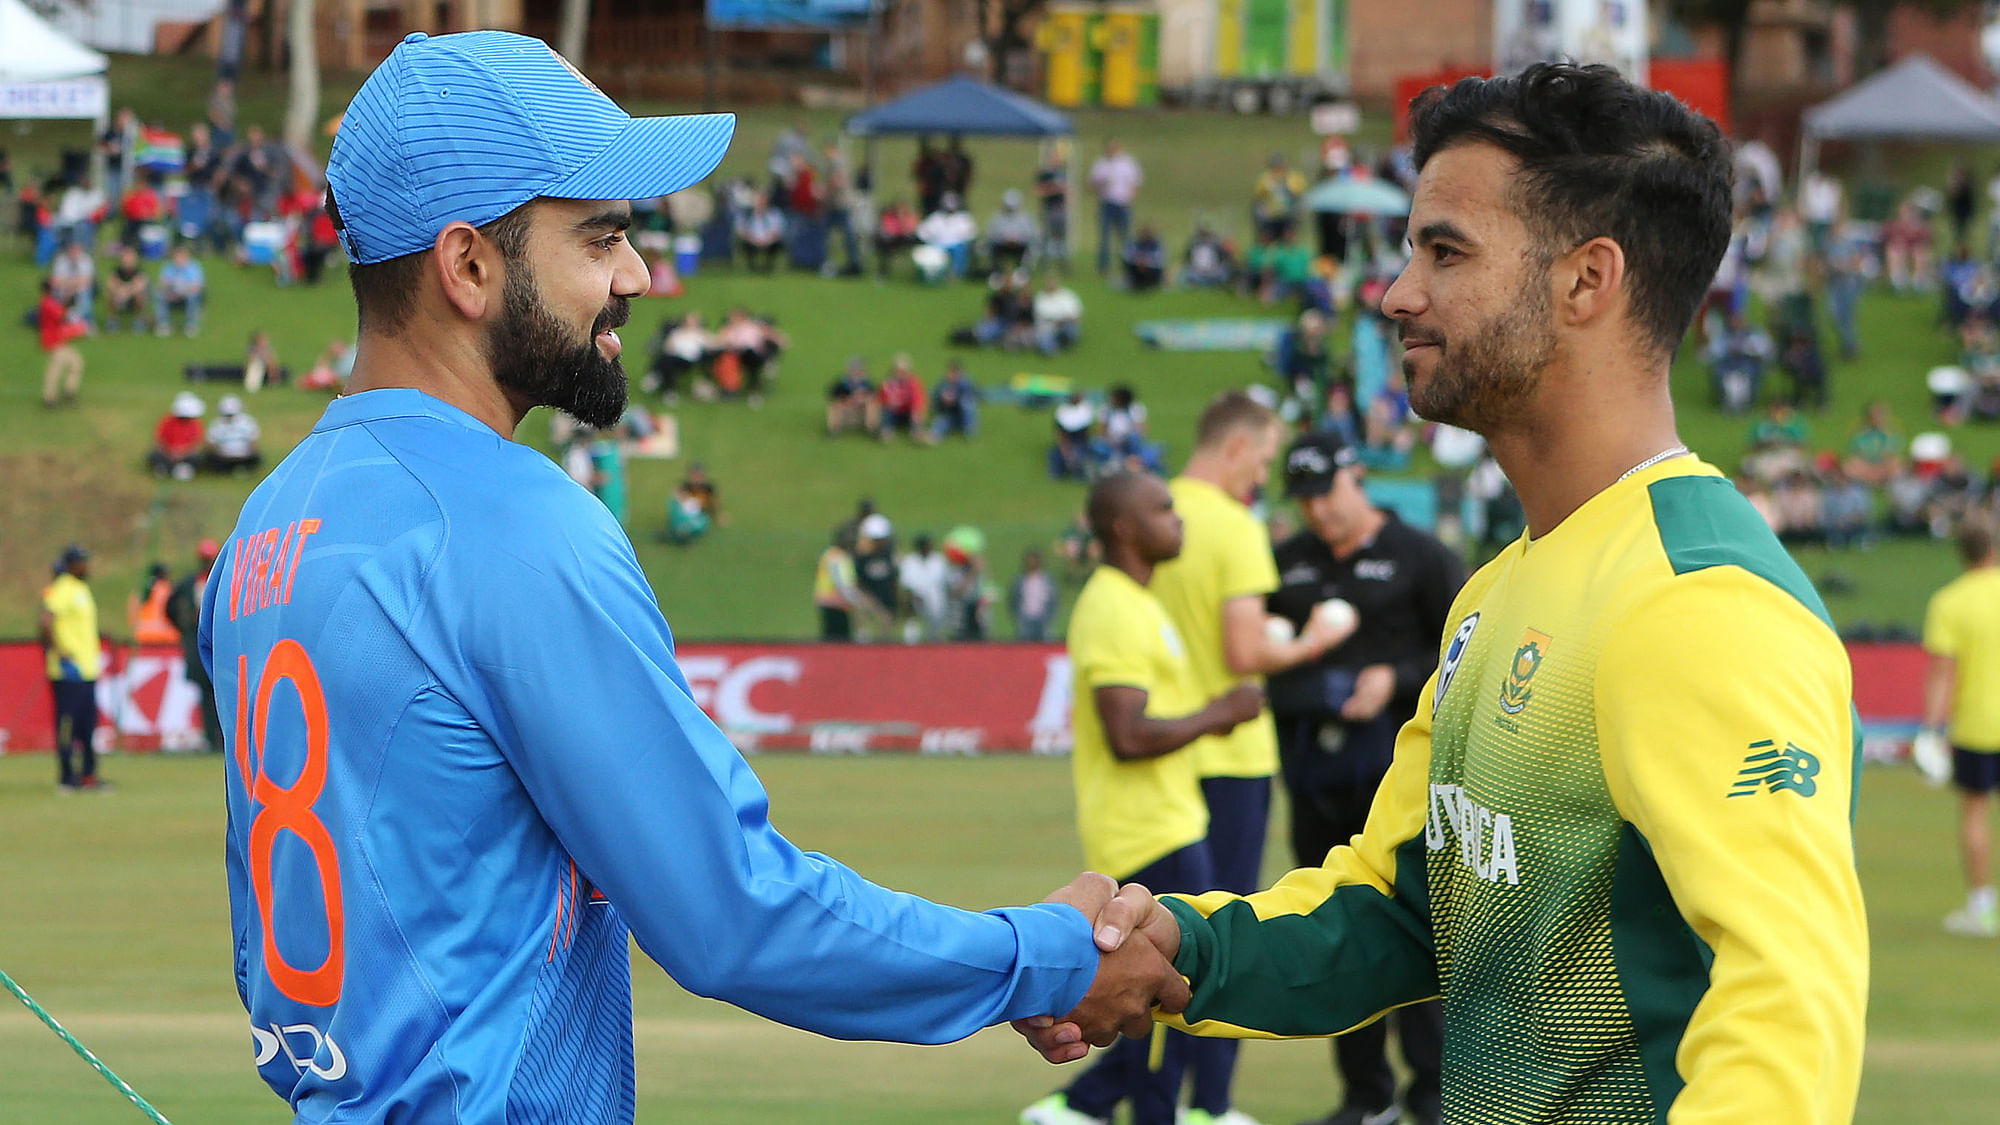 India take on South Africa in the third and final T20 on 24 February.